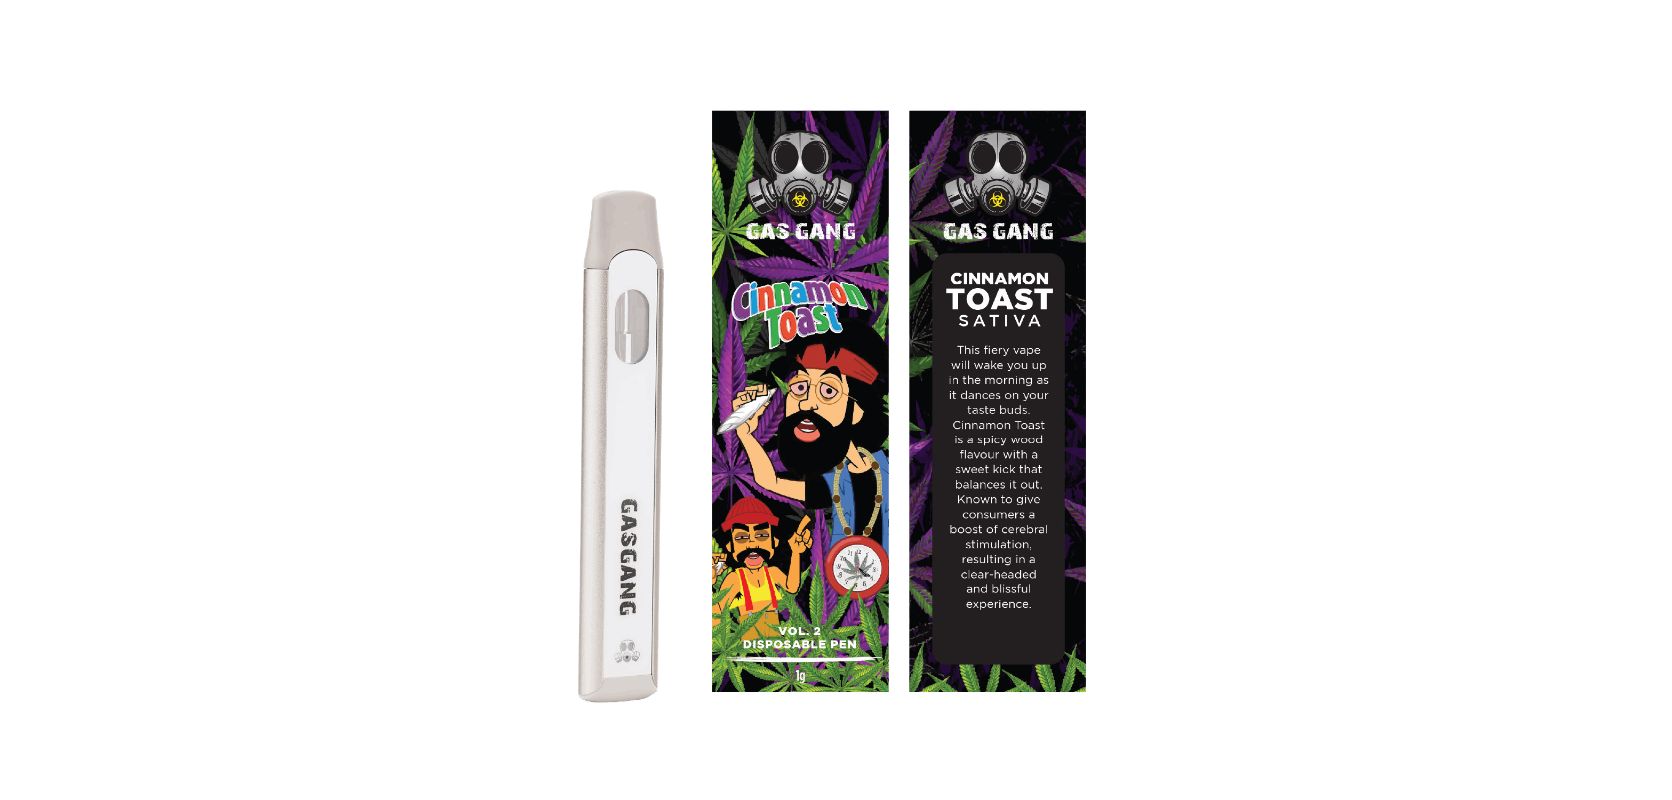 This Sativa will give you a boost of cerebral stimulation and an enjoyable clear-headed experience. Buy this disposable pen with premium distillate for only $40. 